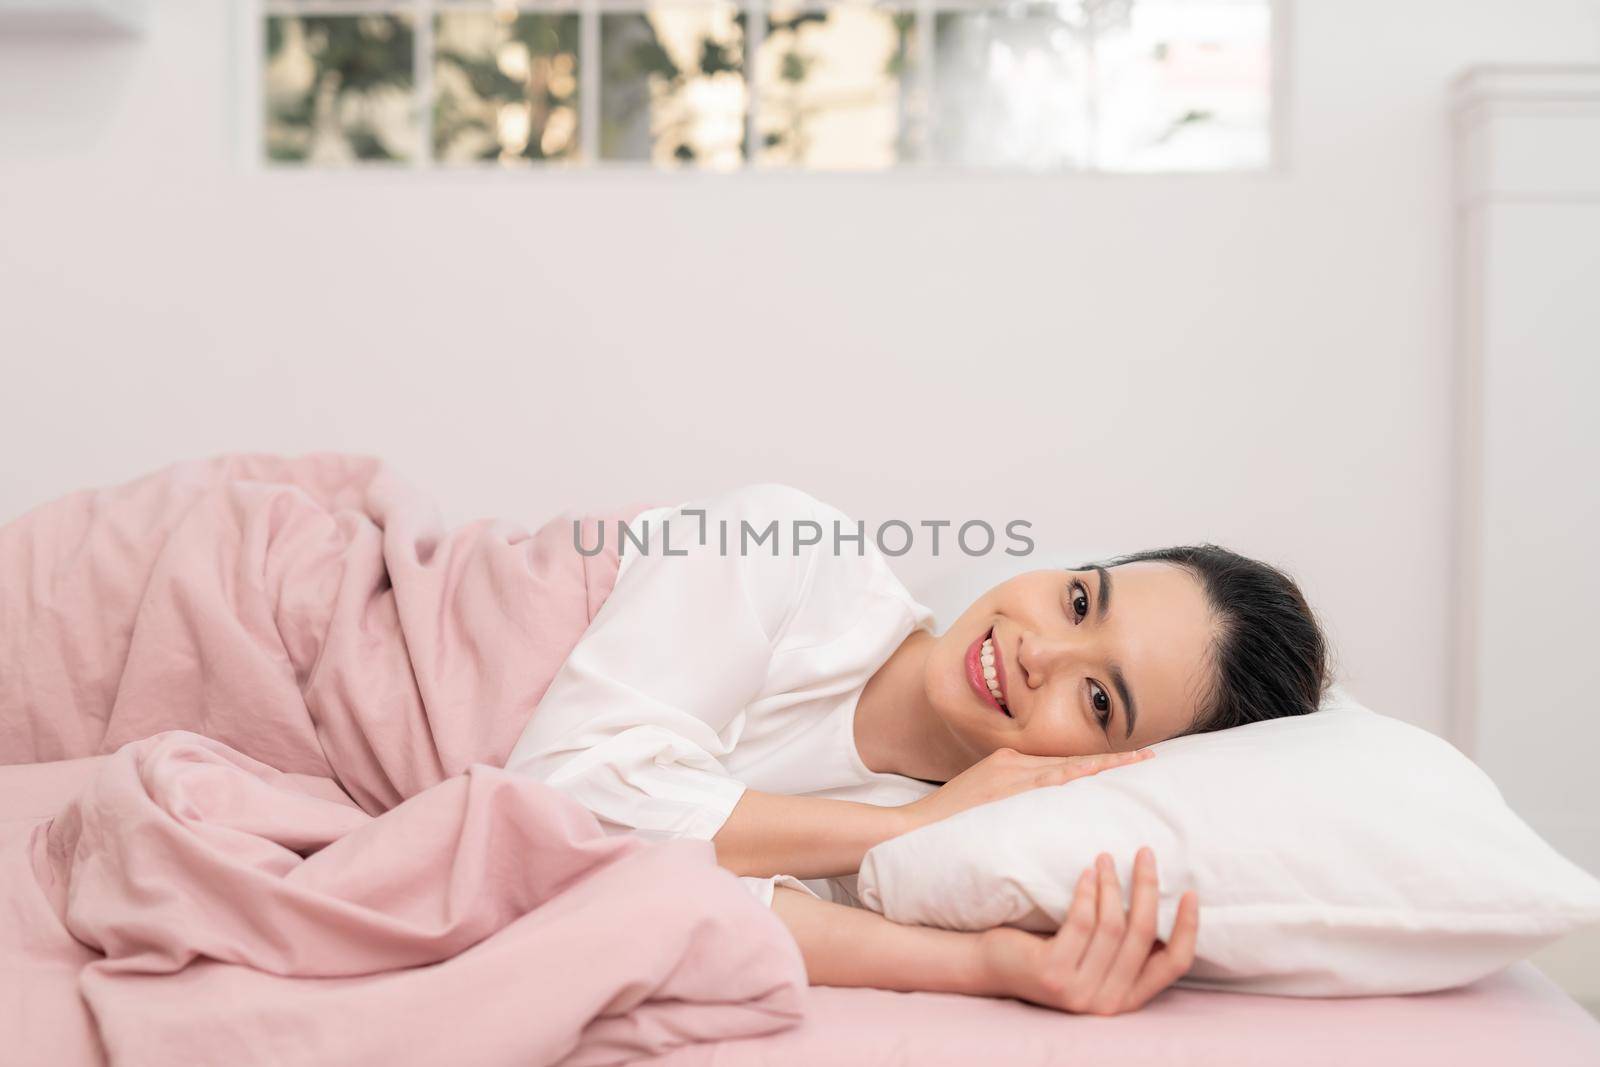 Awakening from sleep happy woman in bed and soft pillow blanket by makidotvn